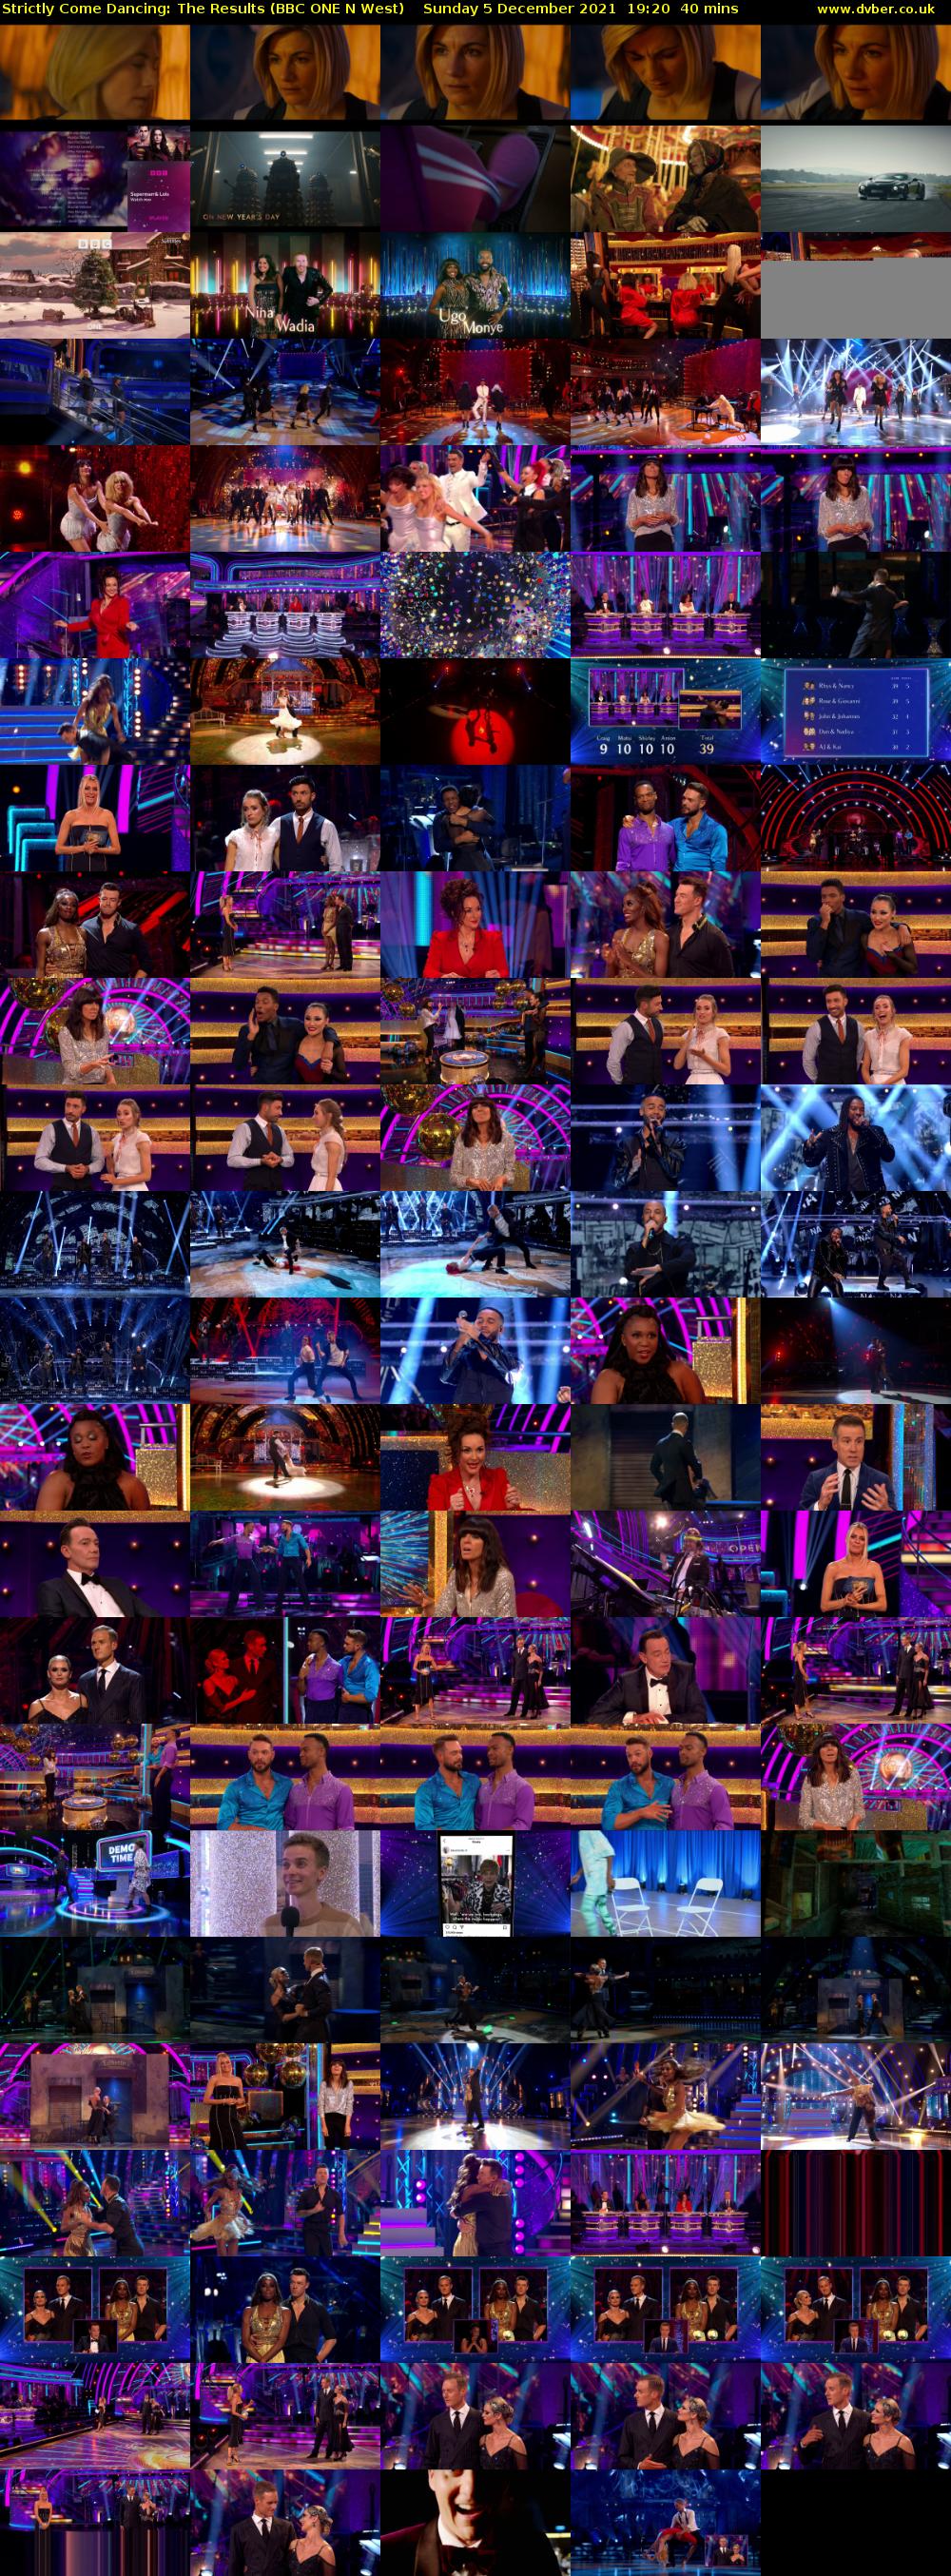 Strictly Come Dancing: The Results (BBC ONE N West) Sunday 5 December 2021 19:20 - 20:00